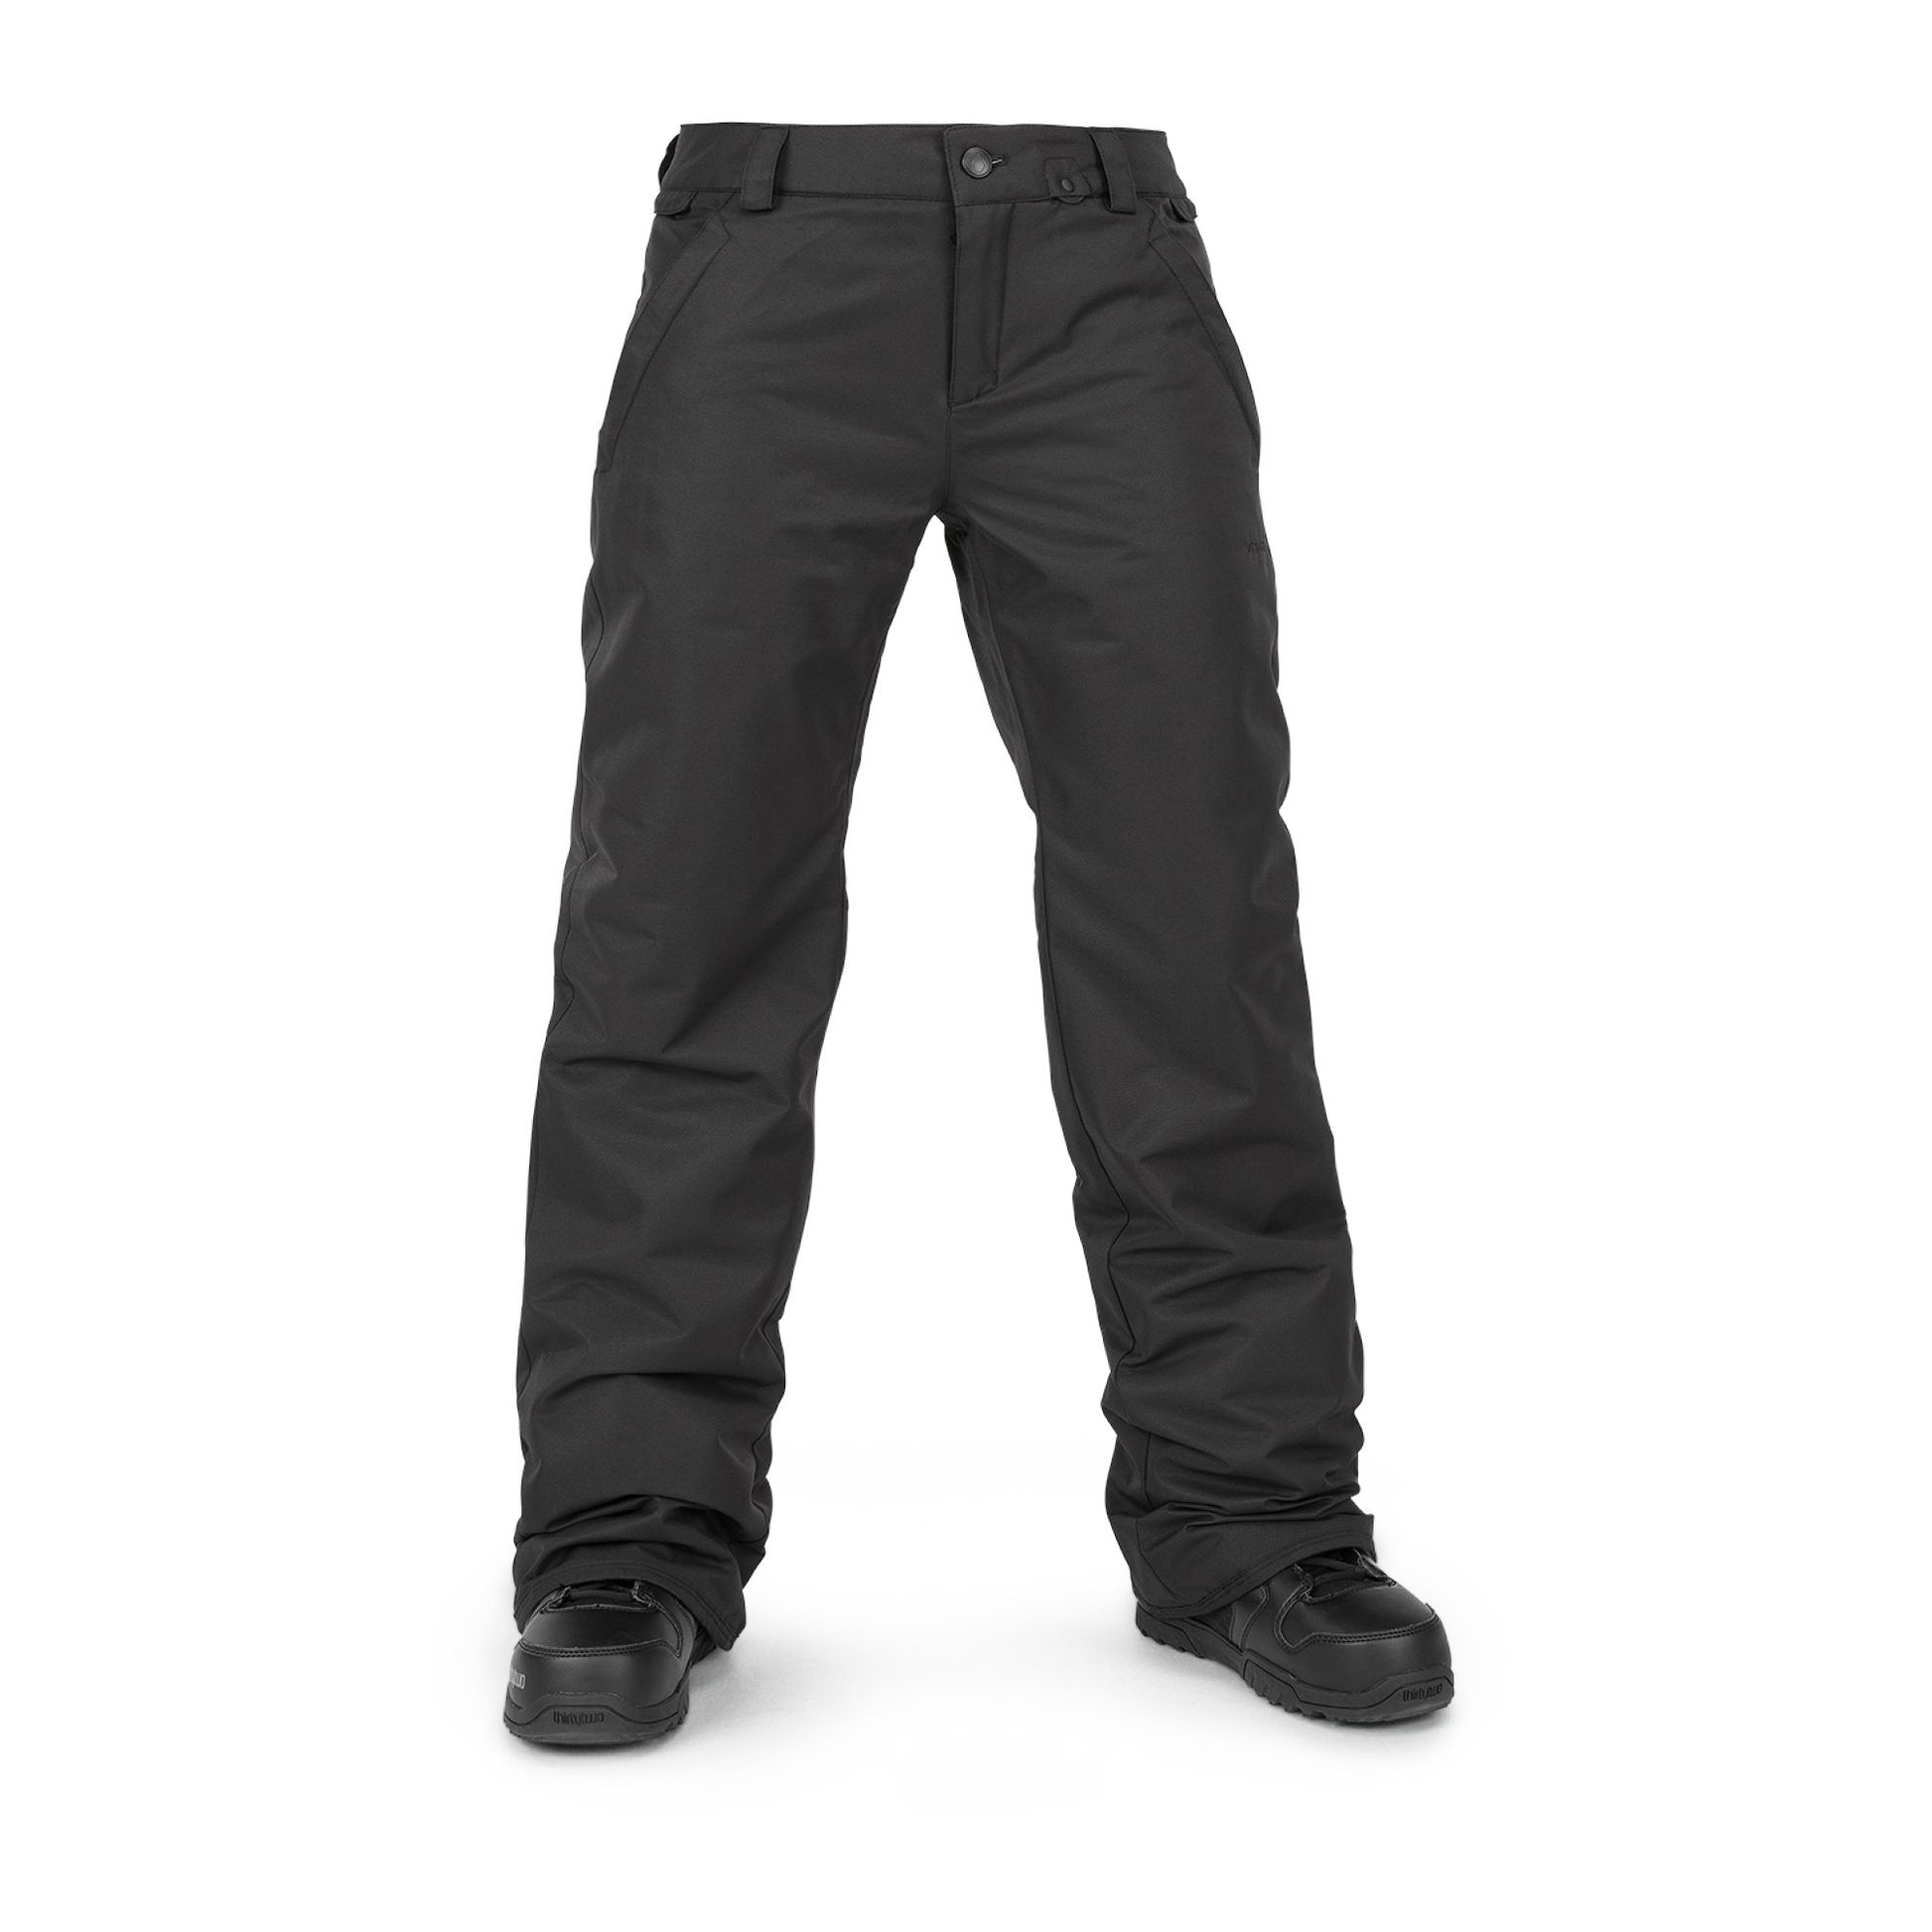 Volcom Women's Frochickie Insulated Pant Black - Volcom Snow Pants